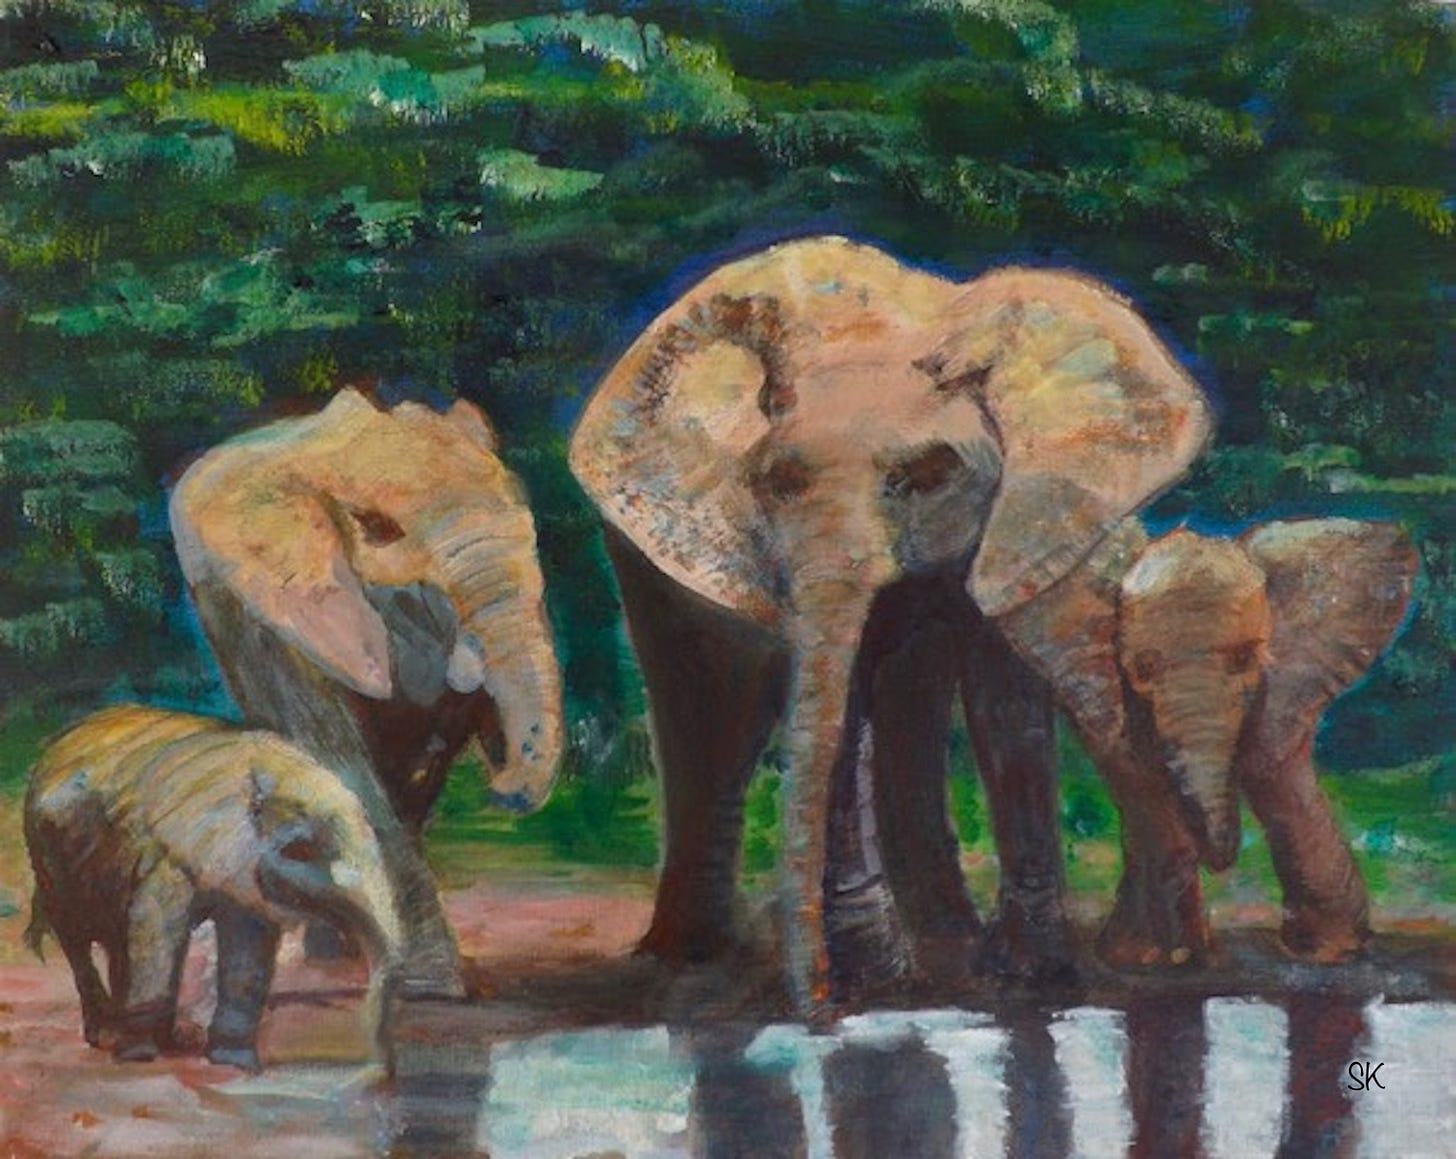 Acrylic painting by Sherry Killam Arts, realistic rendering of an elephant family at a water hole against a dense green forest.